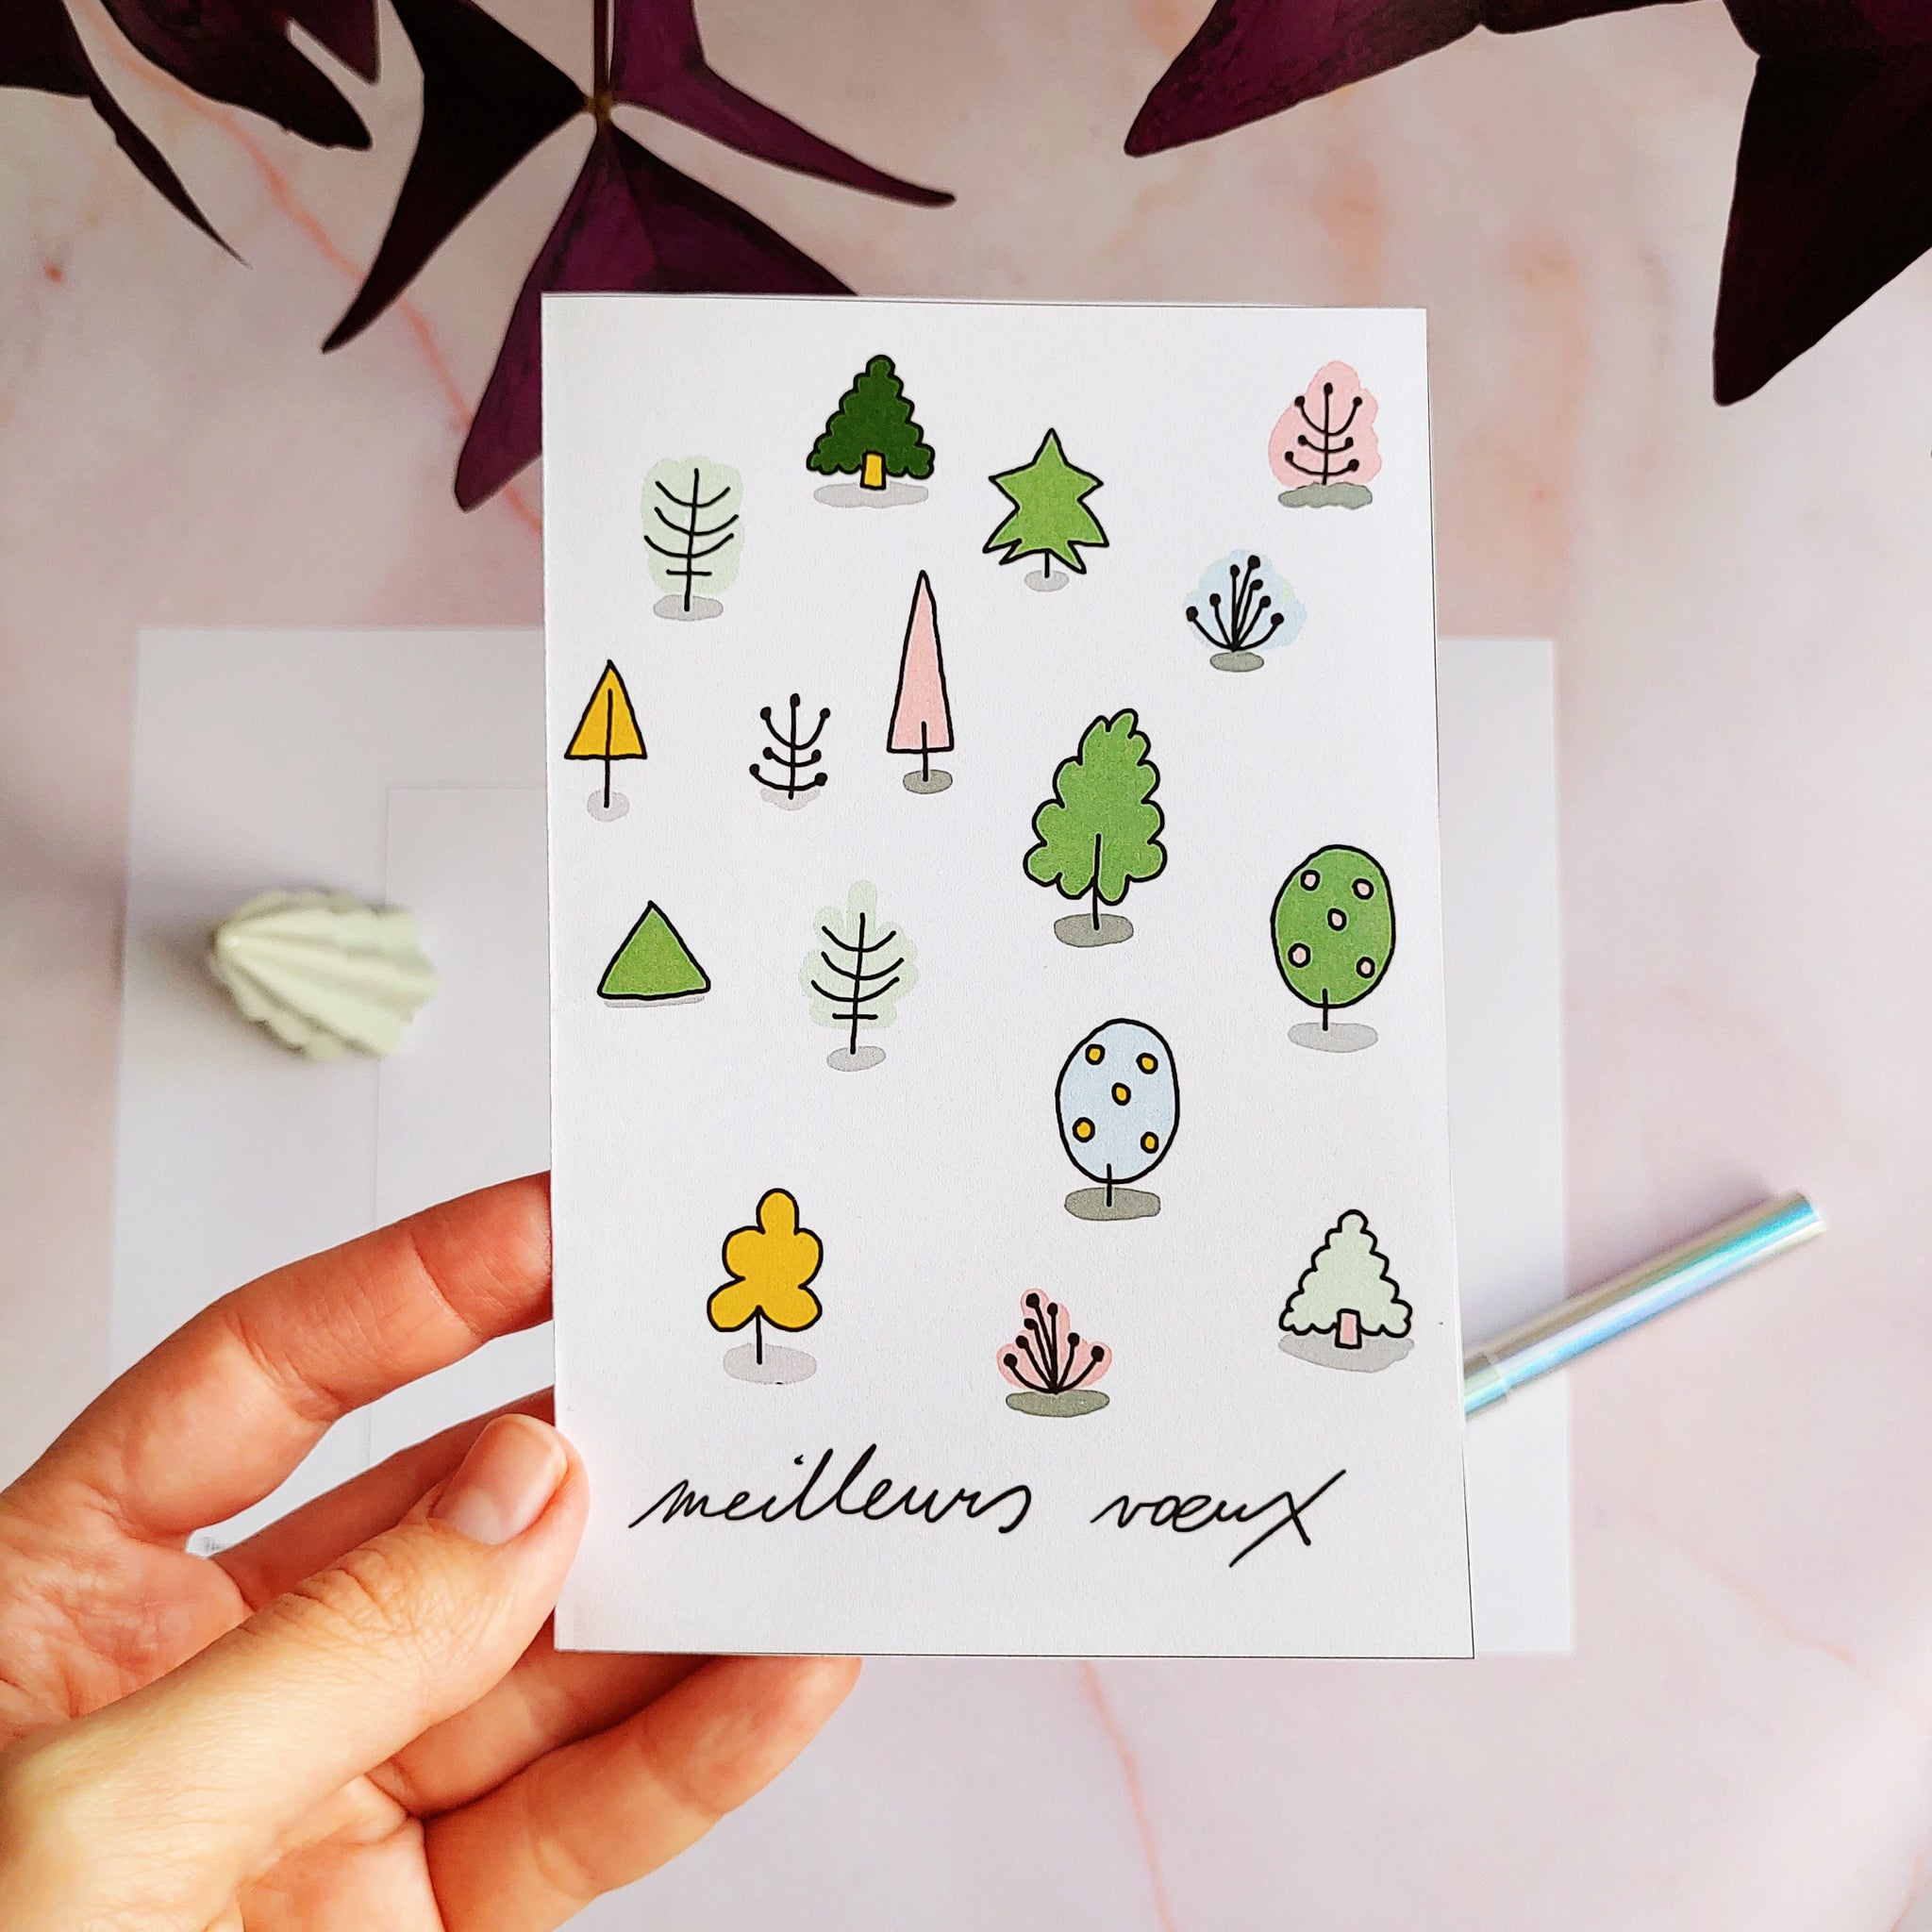 Printable Seasonal Greetings - Meilleurs Voeux - French - Instant Download (free)